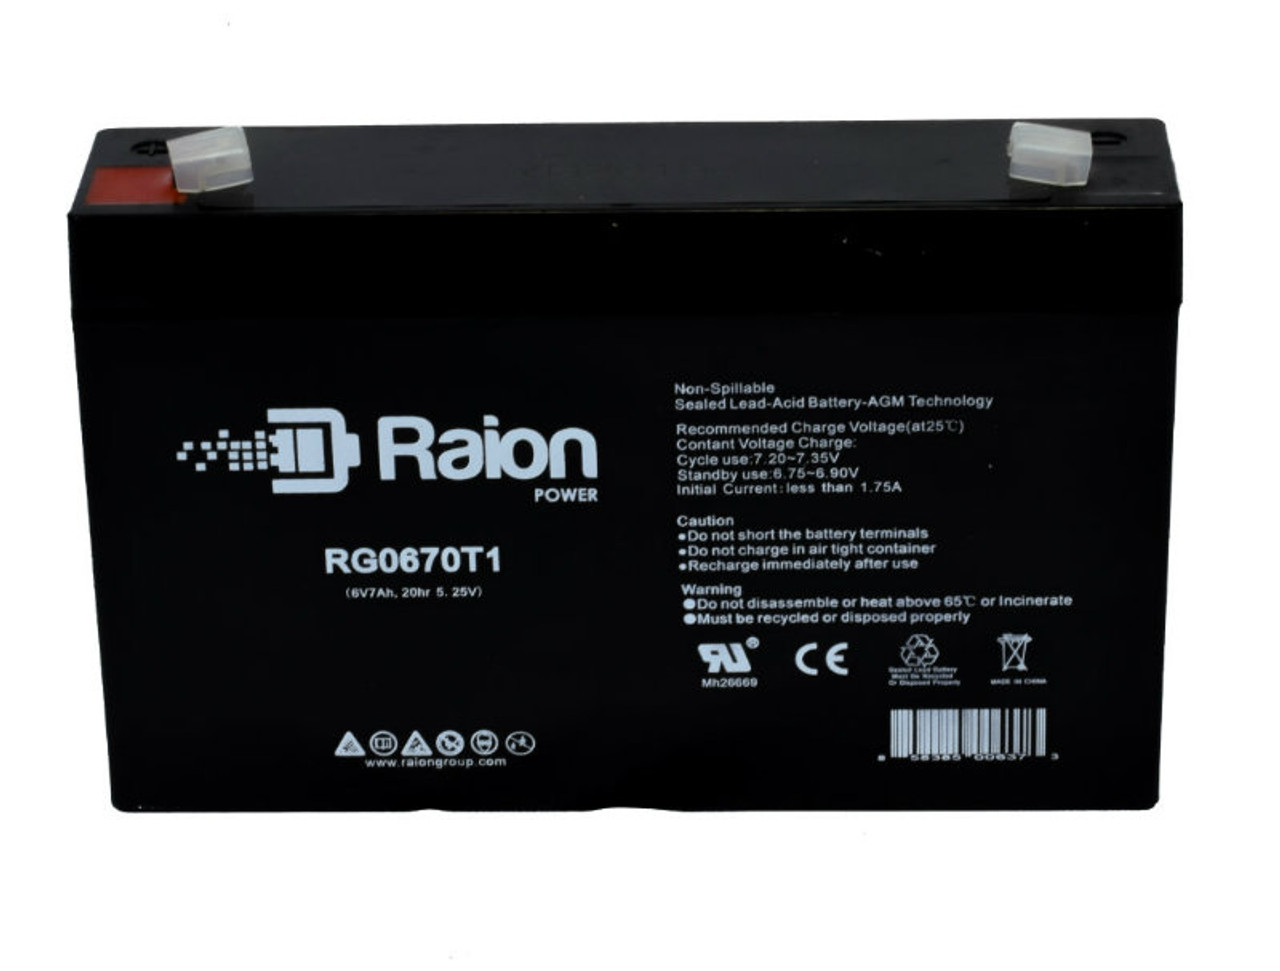 Raion Power RG0670T1 Replacement Battery Cartridge for Portalac PE6V7.2F1